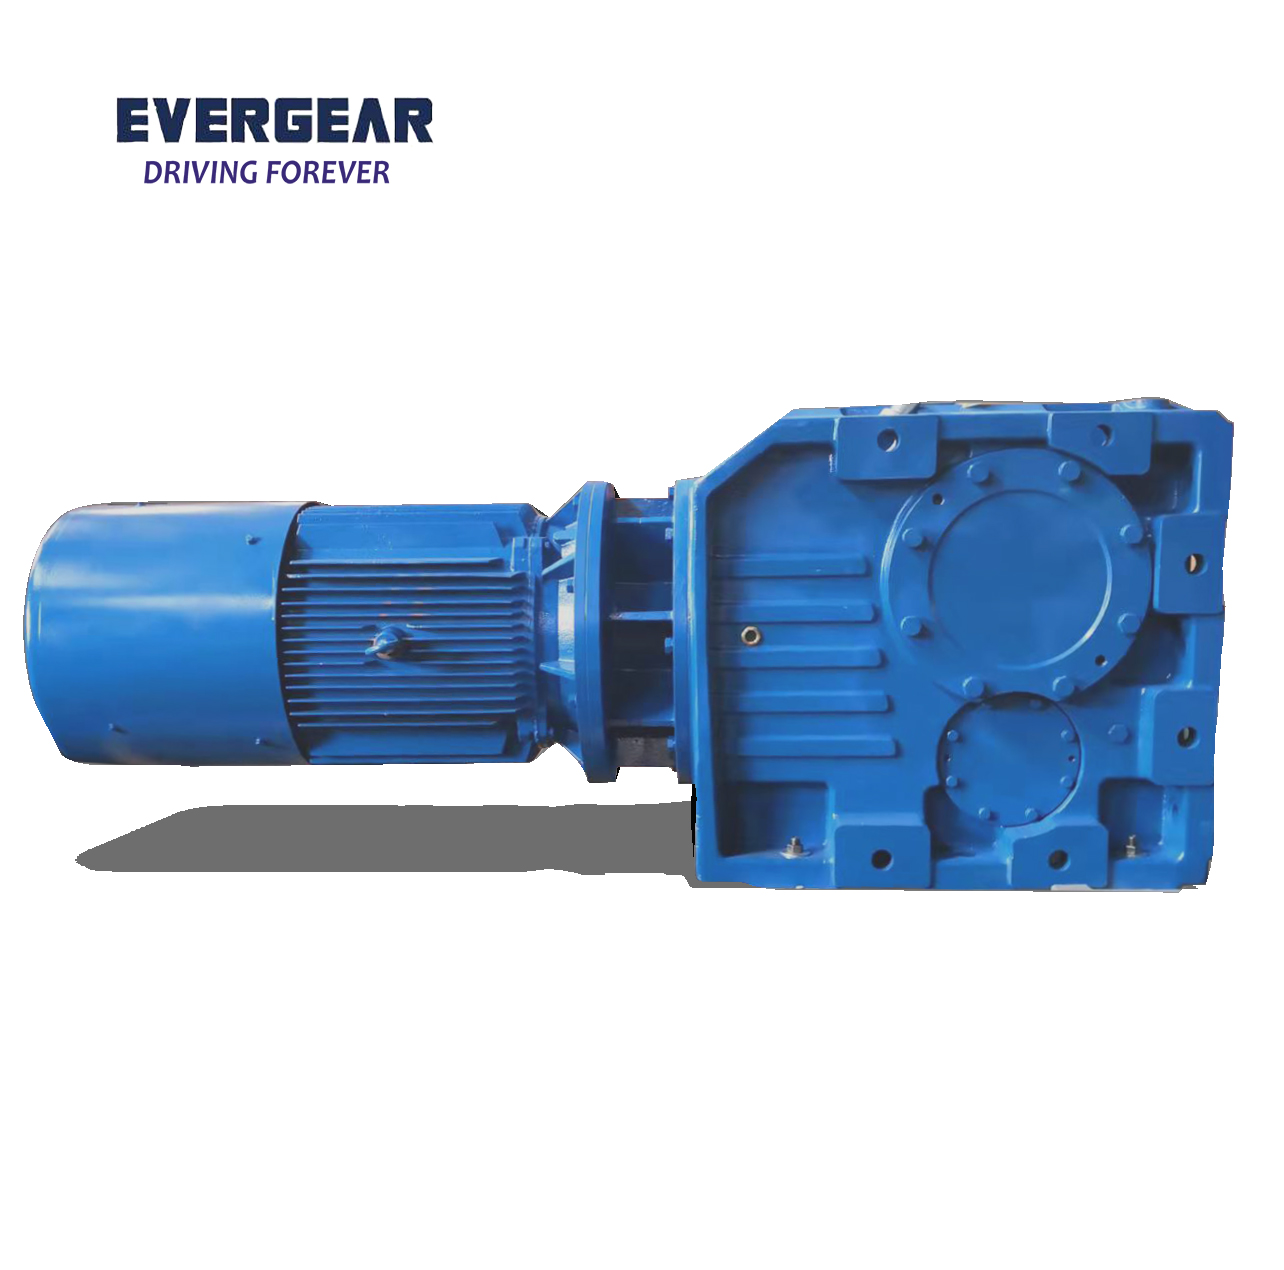 EVERGEAR K series right angle gear box/Gearbox transportador helicoidal